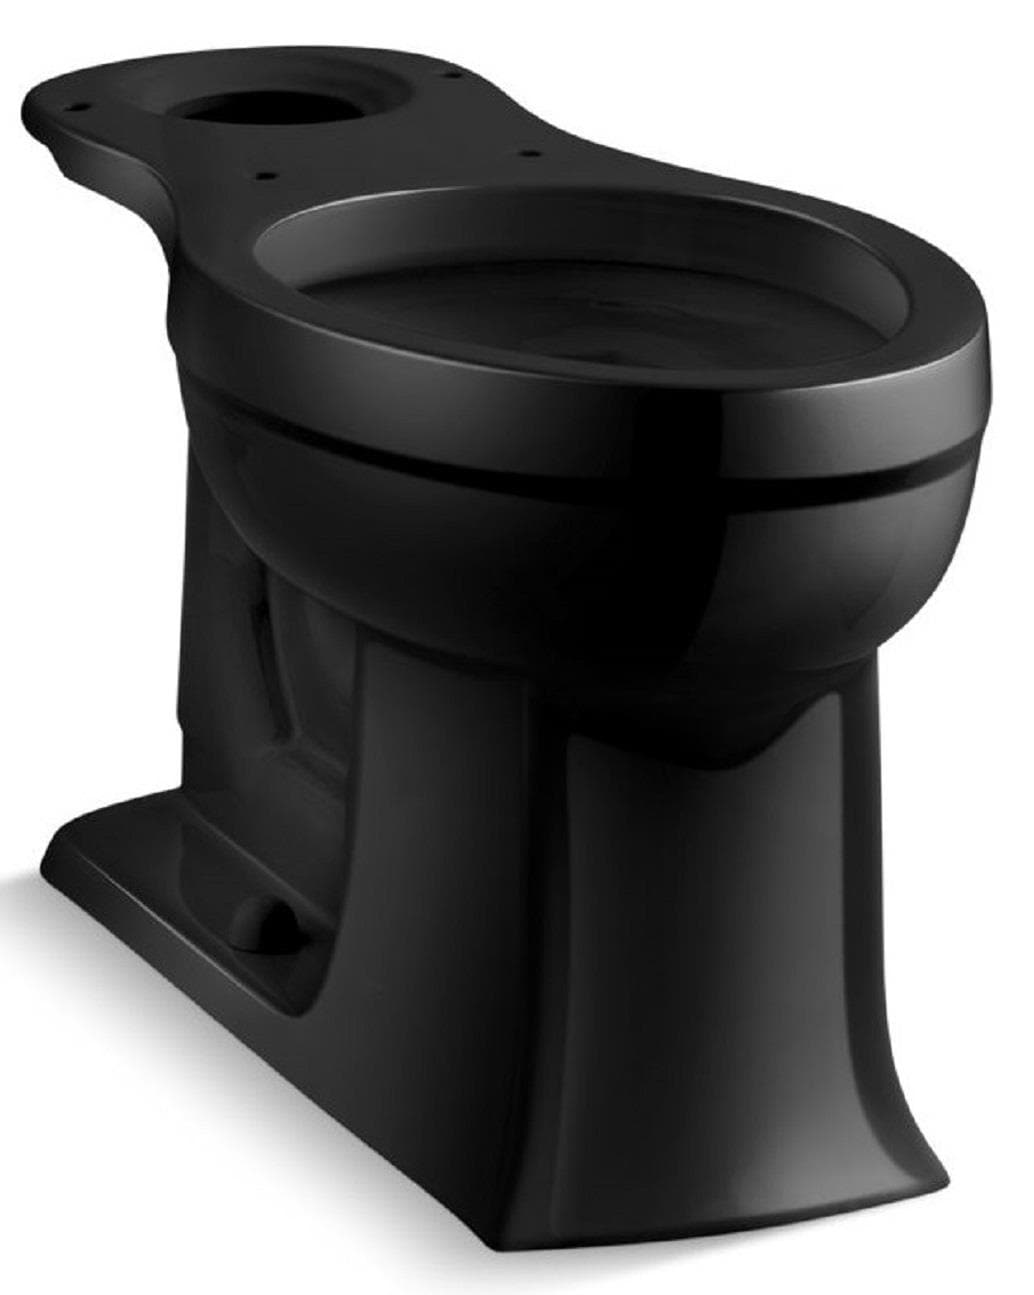 KOHLER Black Elongated Chair Height Toilet Bowl 12-in Rough-In in the ...